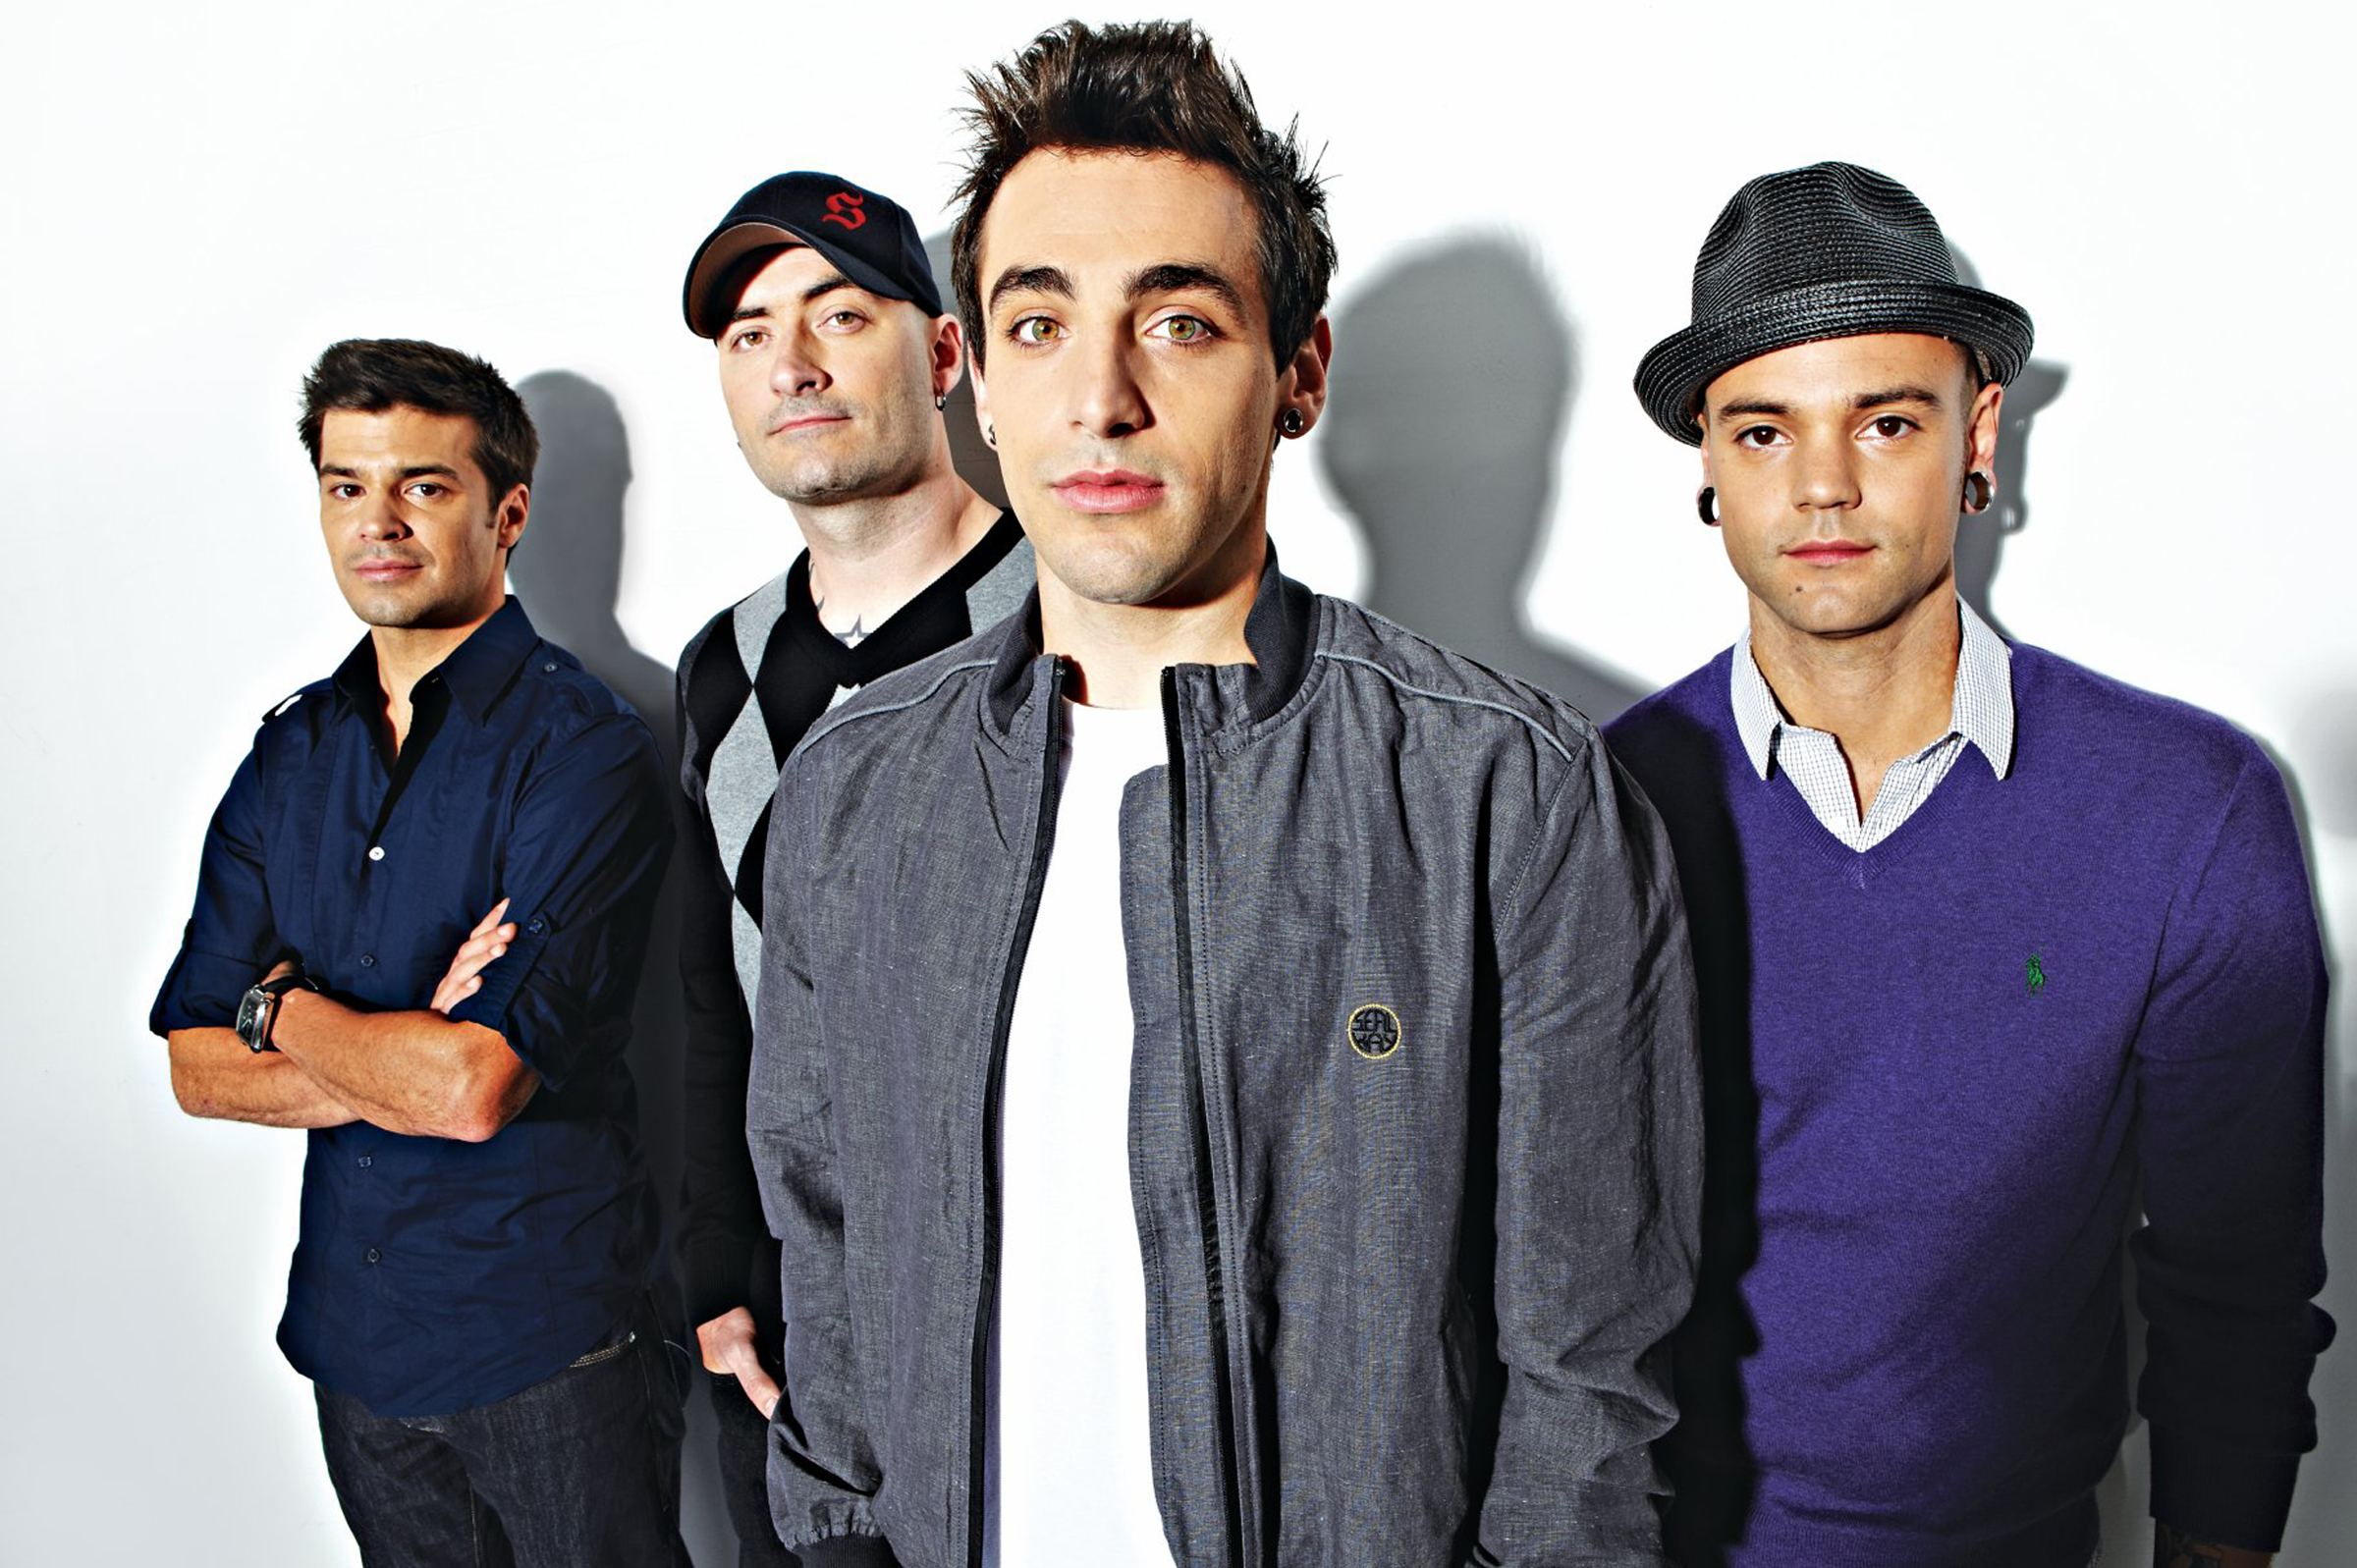 ADVENTURE CONTINUES-Vancouver's Hedley slides into Red Deer Sept. 16 for a performance at the Centrium.